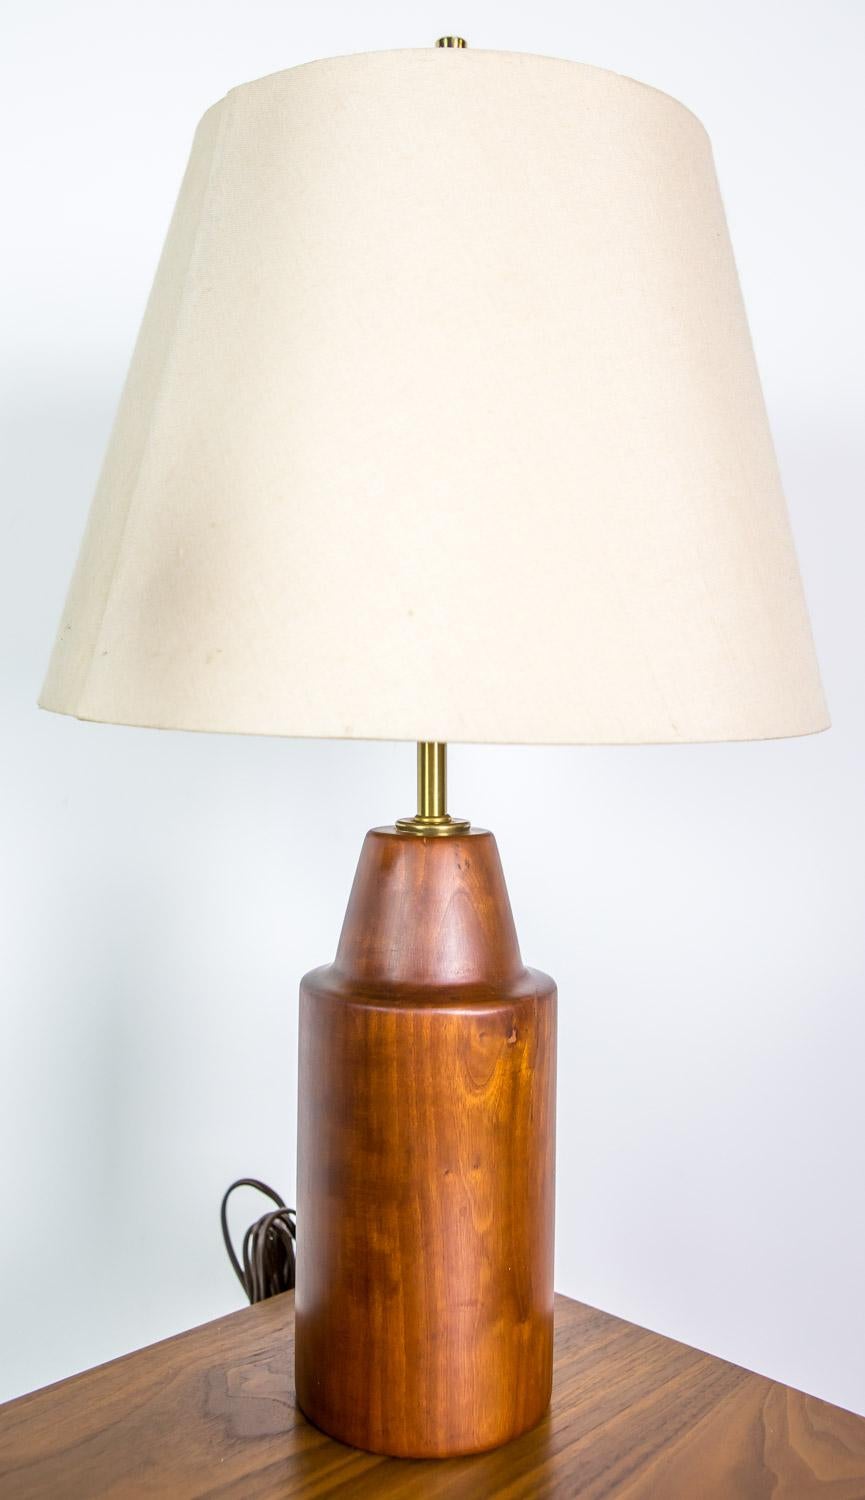 Rare table lamp by Arden Riddle in cherry.
To be on the the safe side, the lamp should be checked locally by a specialist concerning local requirements.
